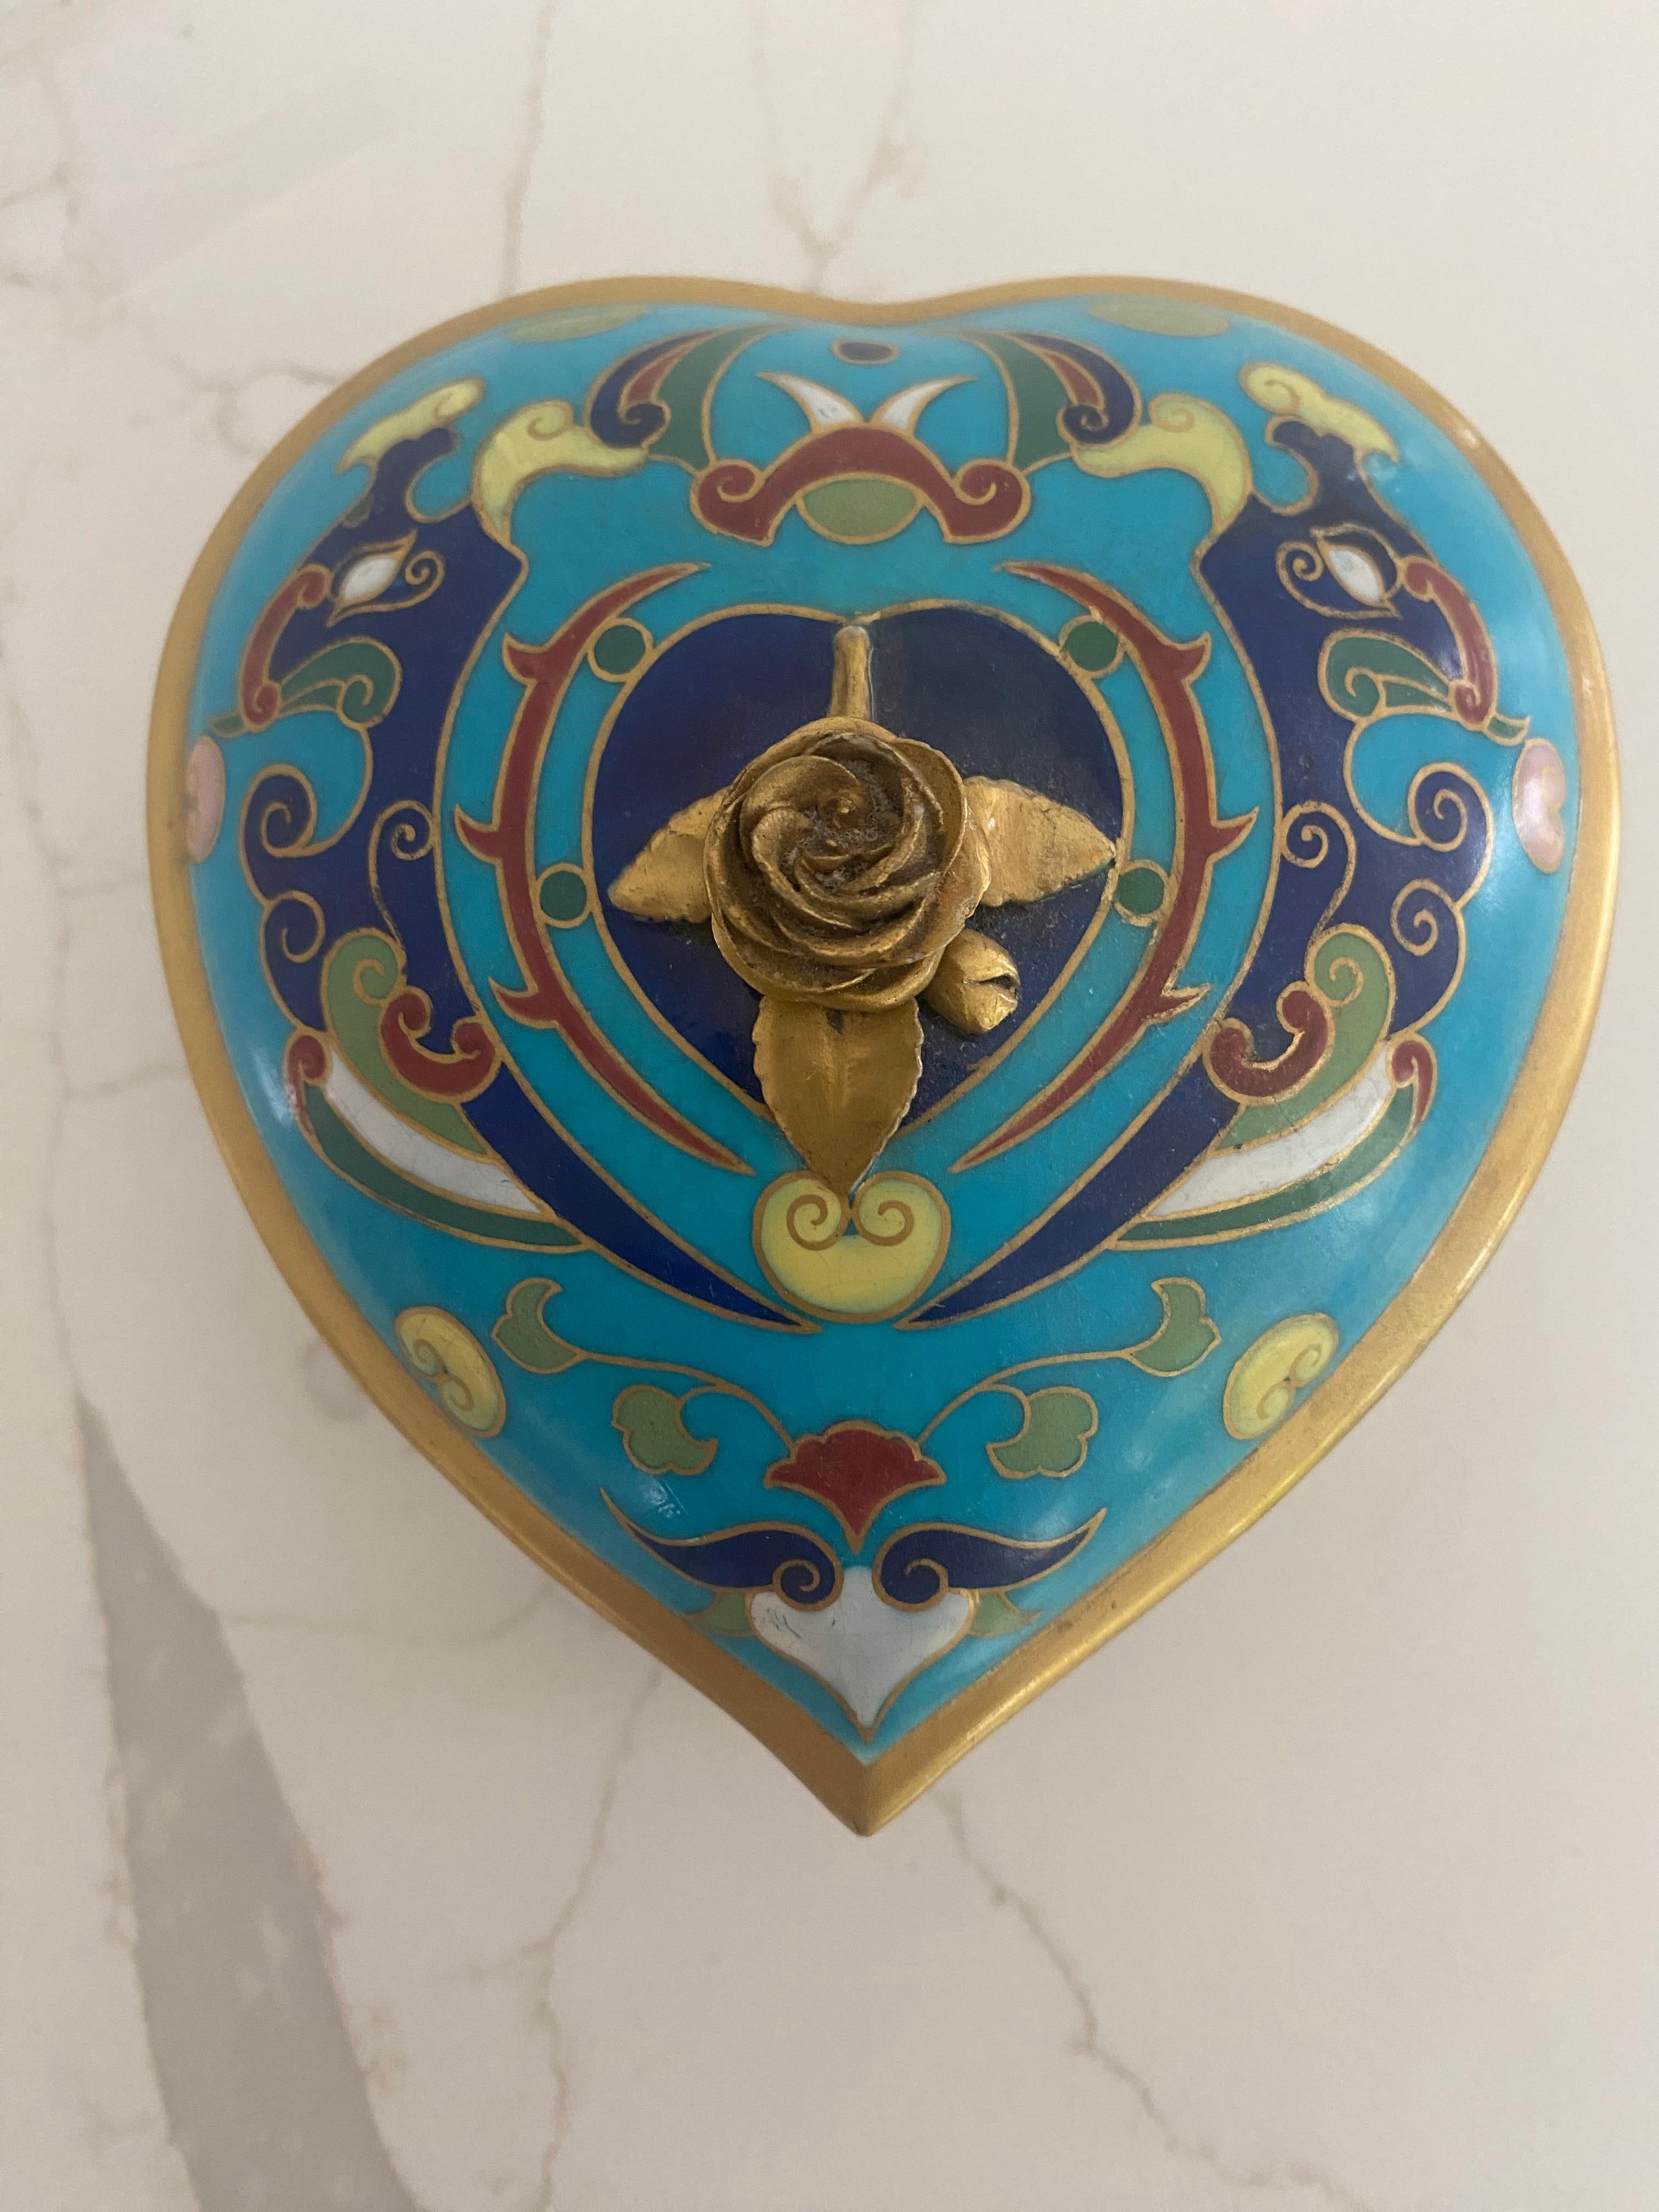 Rare heart shaped inkwell designed by Christopher Dresser made by Mintons.  Impressed markings OO / MINTON / 15

Pink version on line...

Old Christies East labels 